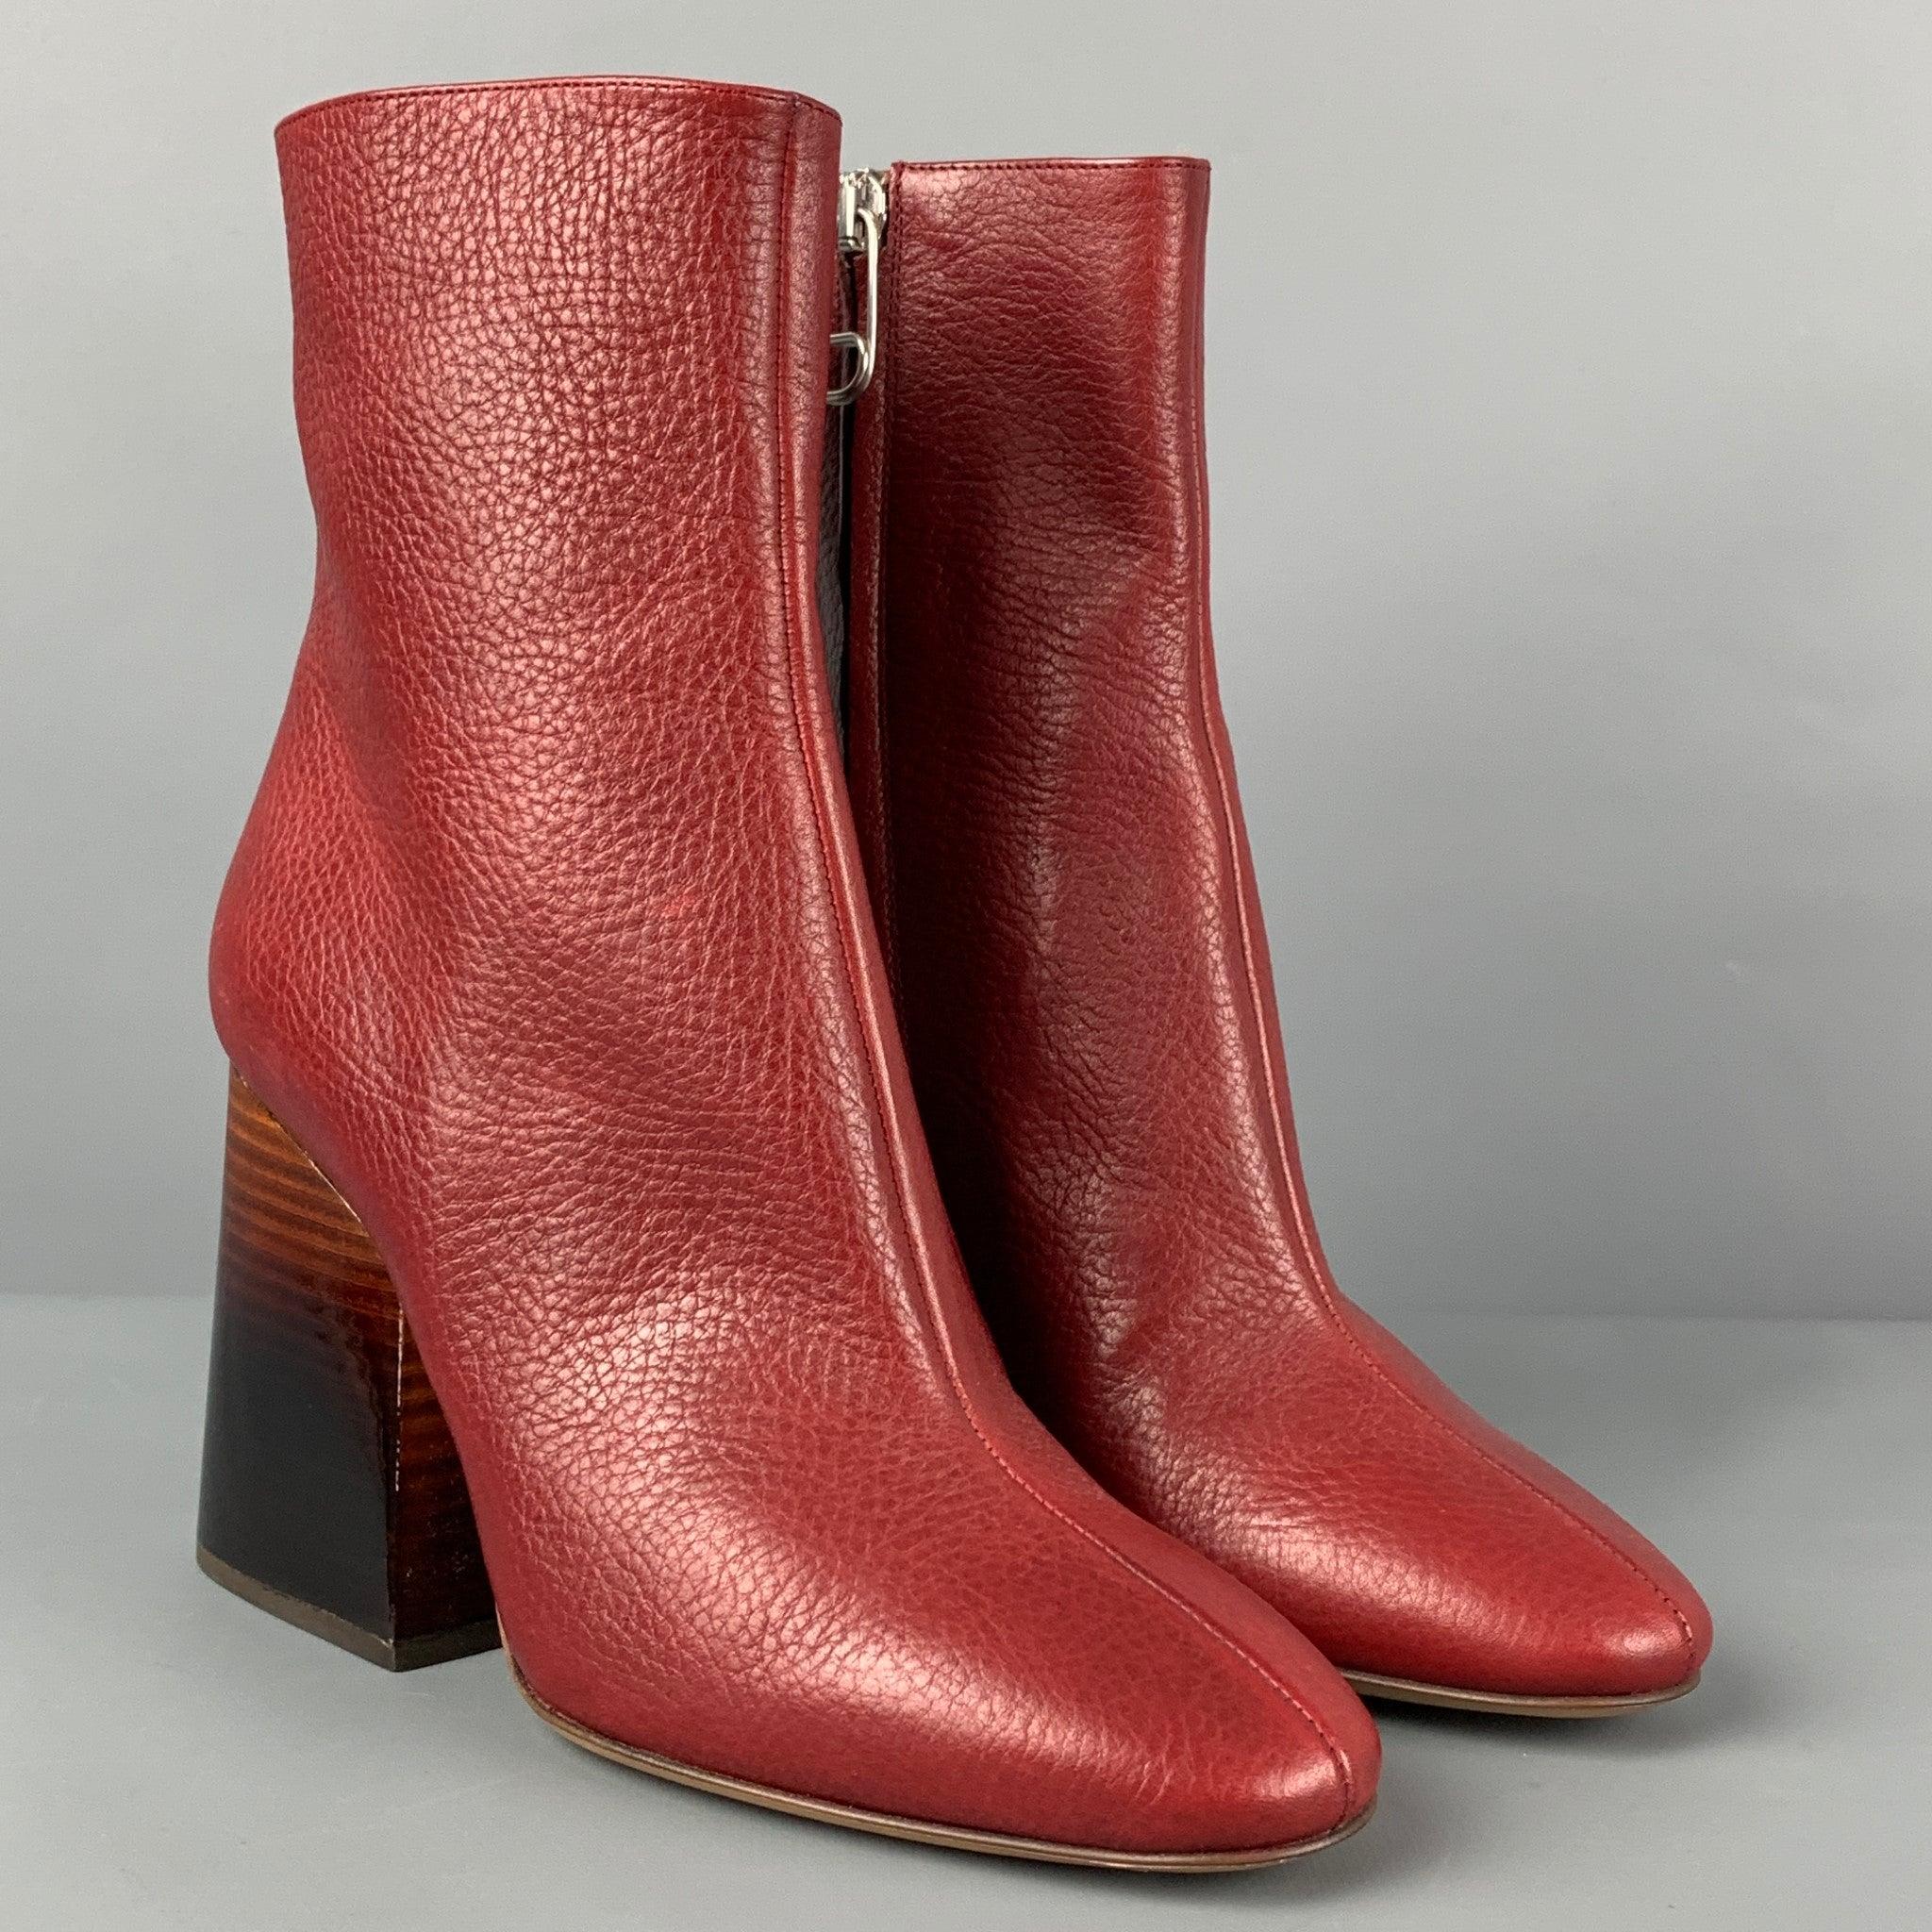 MAISON MARTIN MARGIELA boots comes in a red pebble grain leather featuring a side zipper closure and a ombre chunky heel. Made in Italy.
New With Box.
 

Marked:   36 

Measurements: 
  Heel: 3.5 inches 
  
  
 
Reference: 117970
Category: